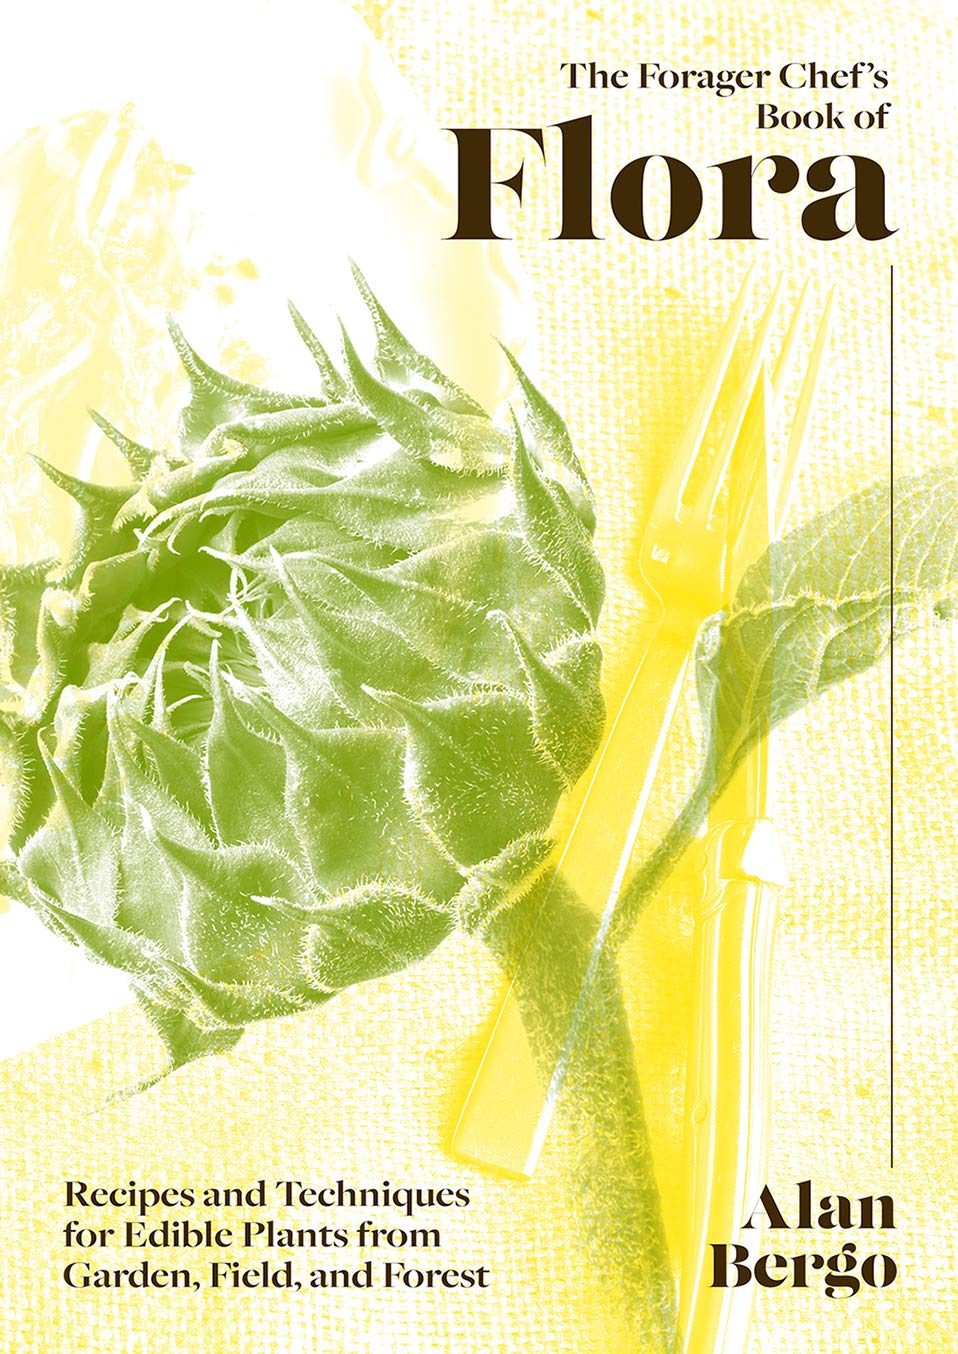 The Forager Chef's Book of Flora: Recipes and Techniques for Edible Plants from Garden, Field, and Forest (Alan Bergo)